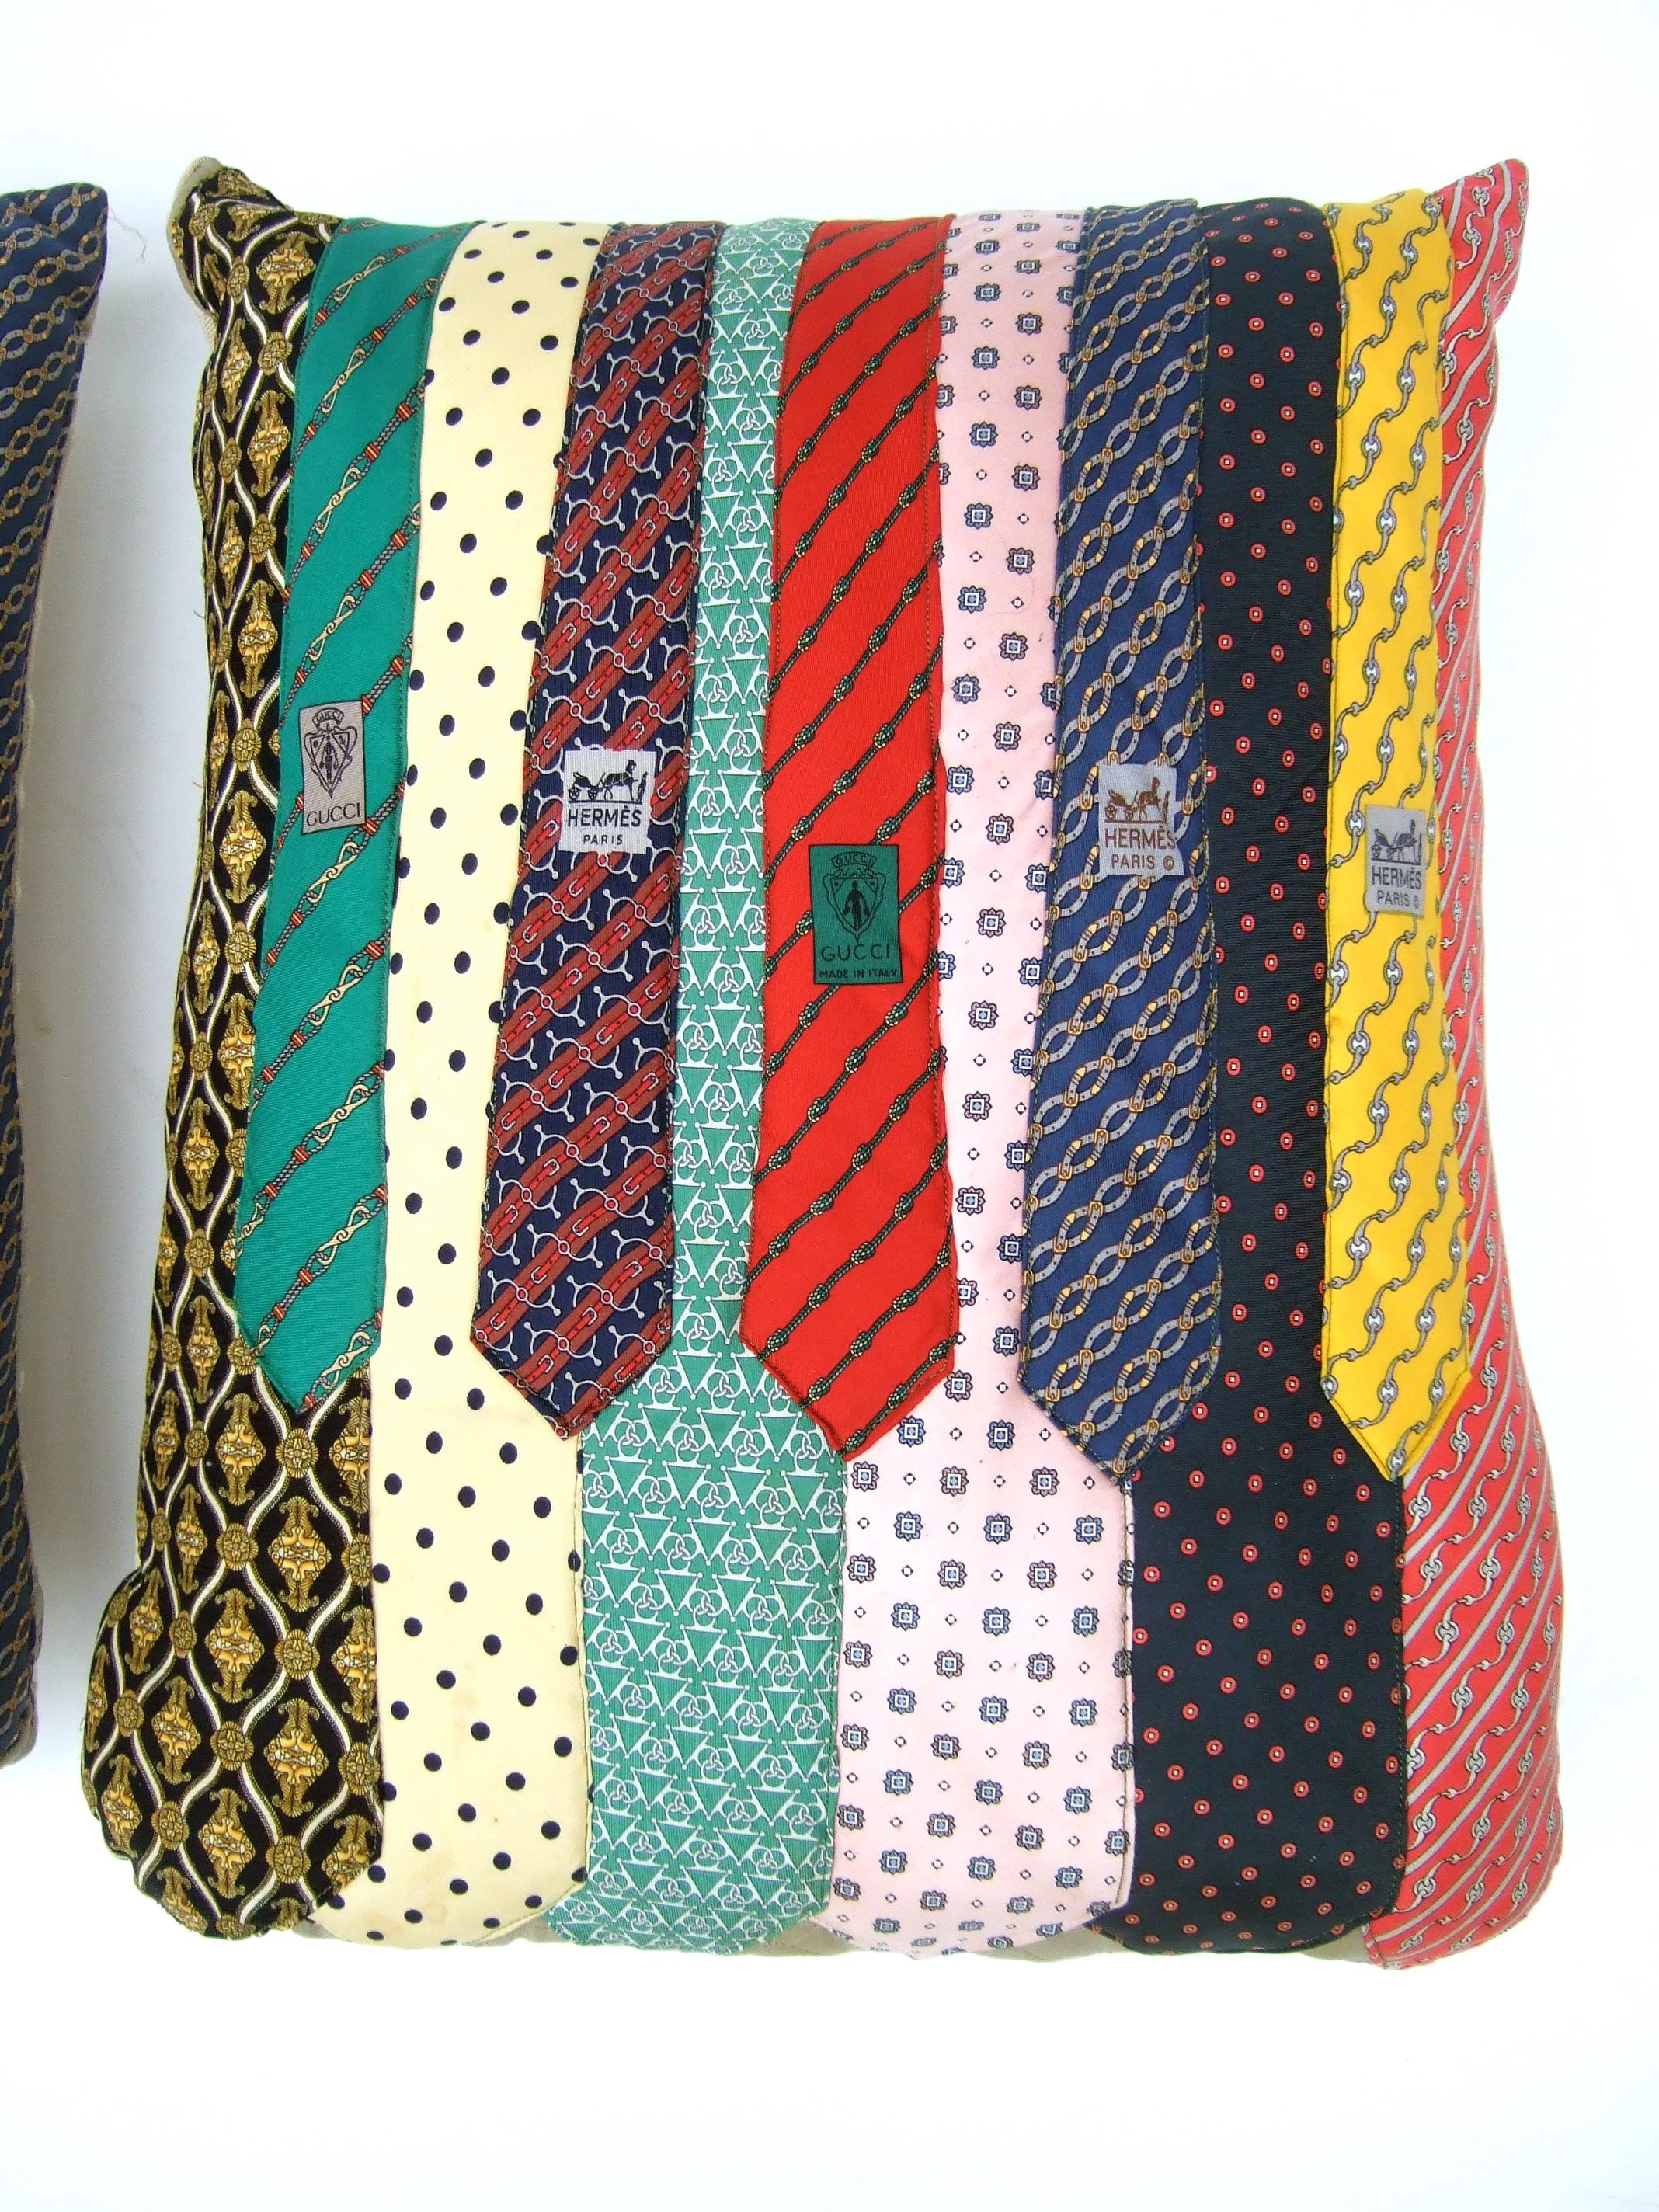 Pair of Vintage Hermes & Gucci Silk Necktie Up-cycled Handmade Pillows c 1980s  For Sale 5